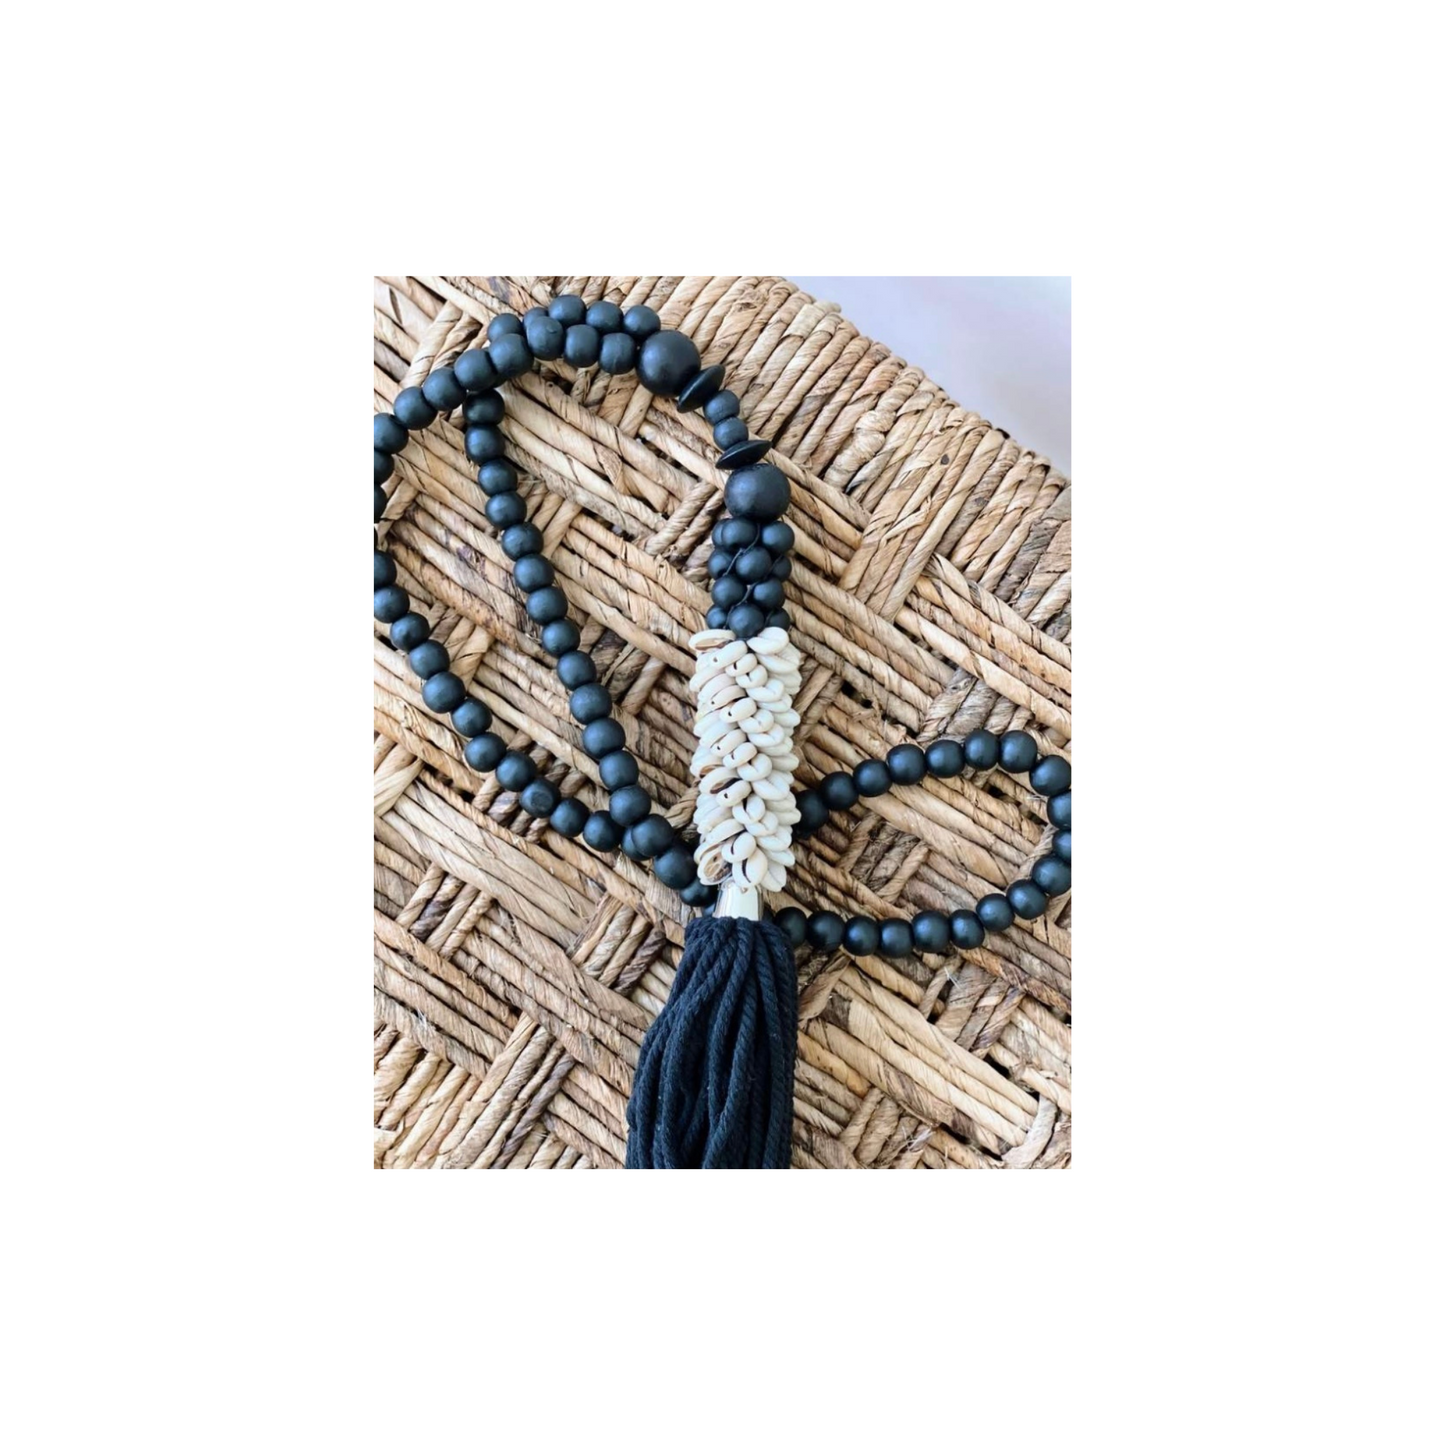 Black wood bead garland with beige shells and black cotton tassel on woven background